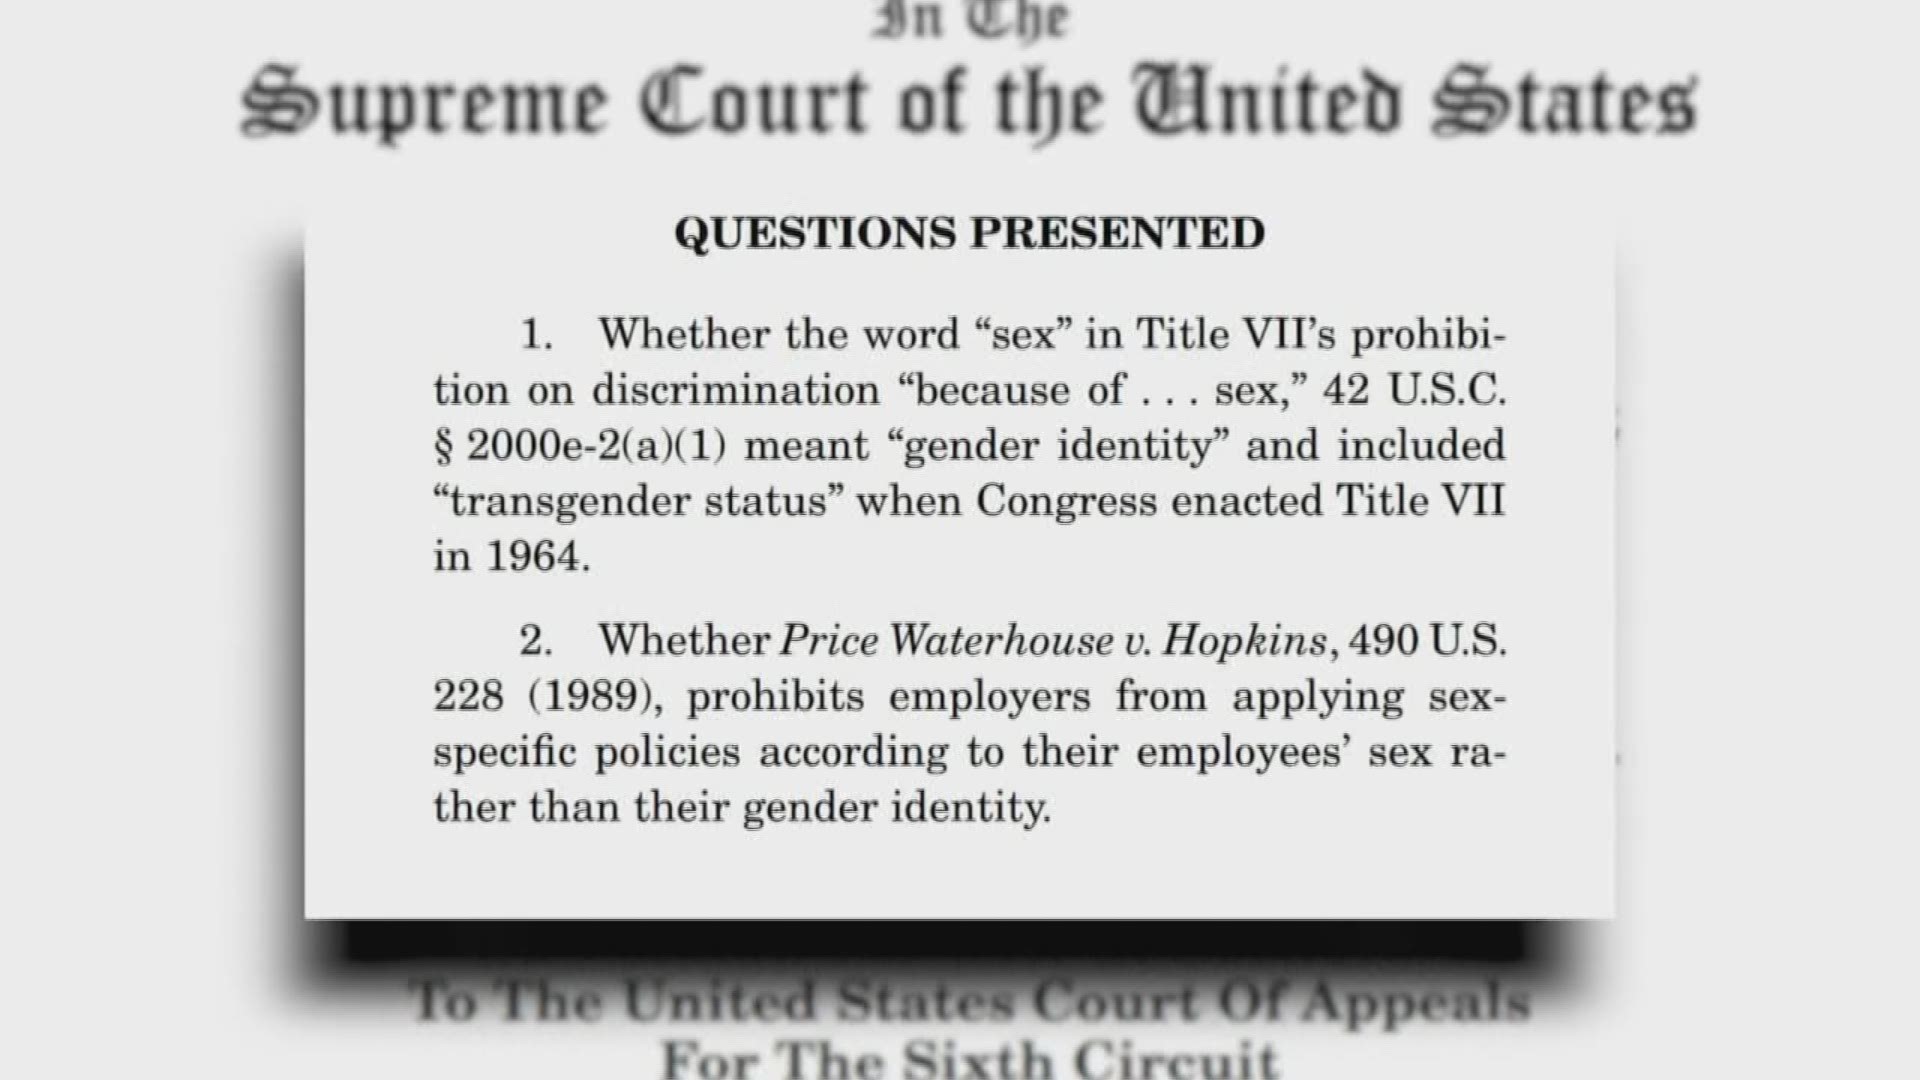 LePage asks court to allow discrimination based on sexual orientation or gender identity